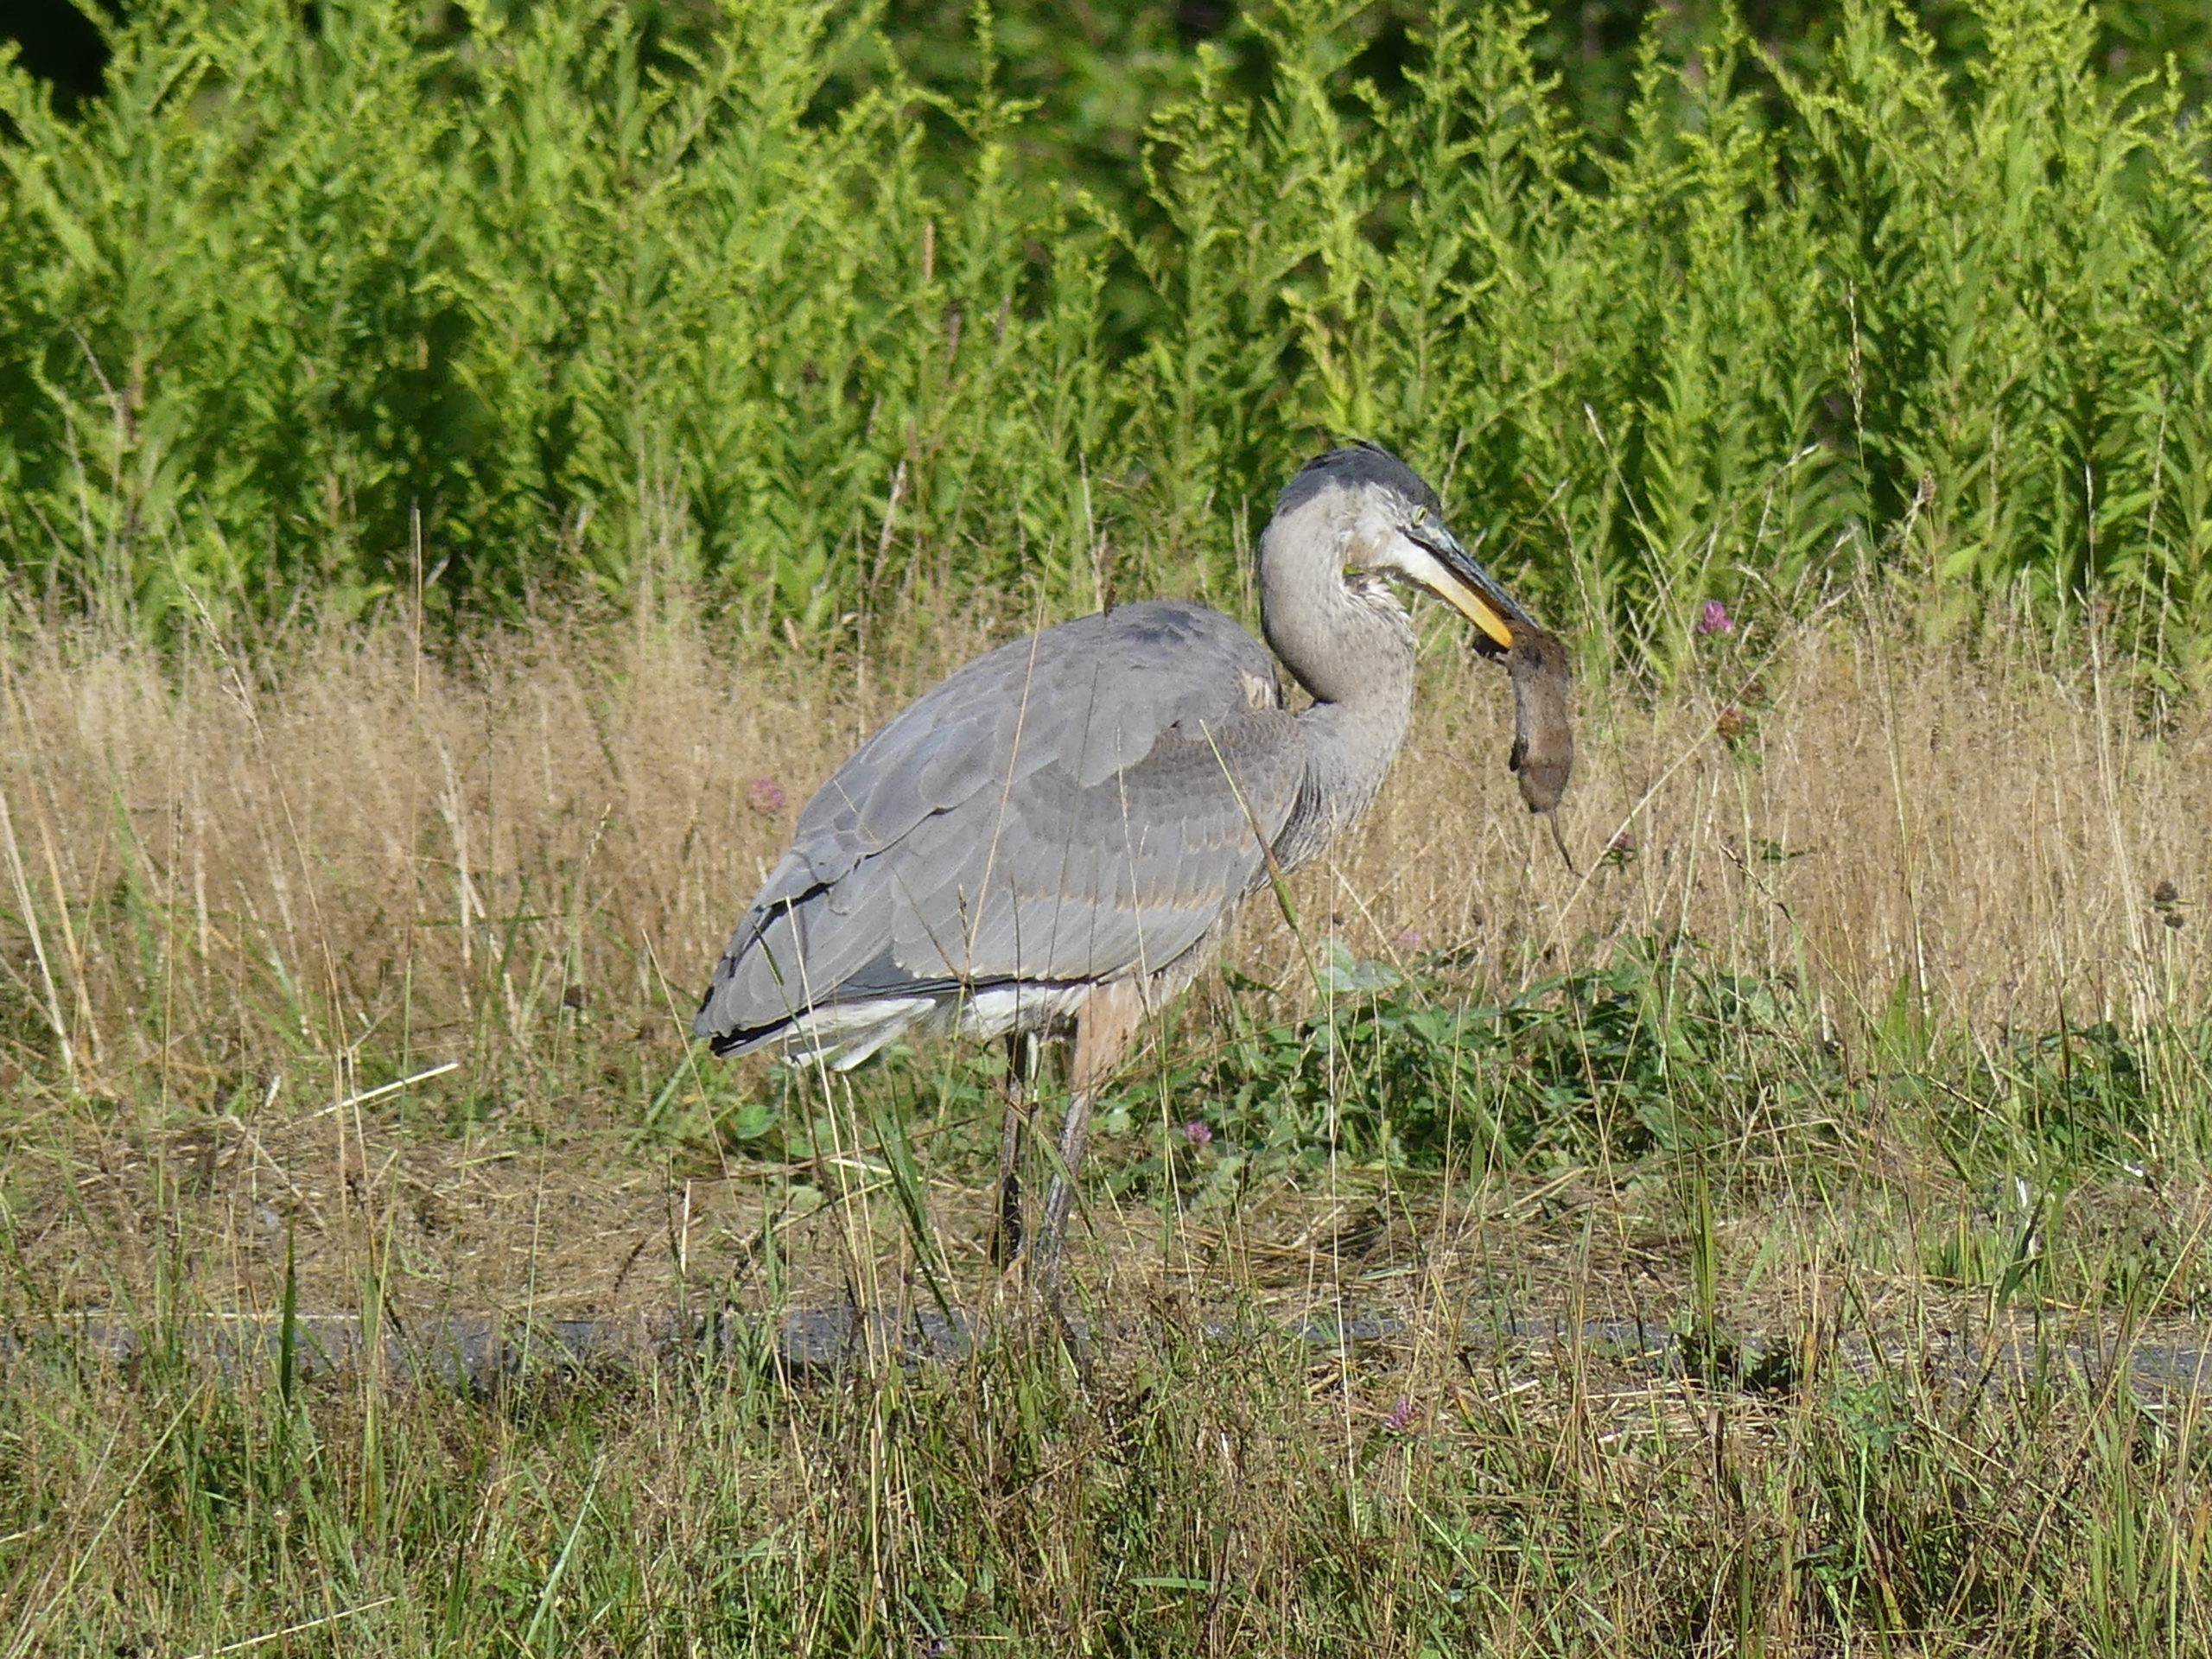 A great blue heron, not commonly known as a rodent hunter, caught a large vole along a meadow path and in two gulps made a meal of it.